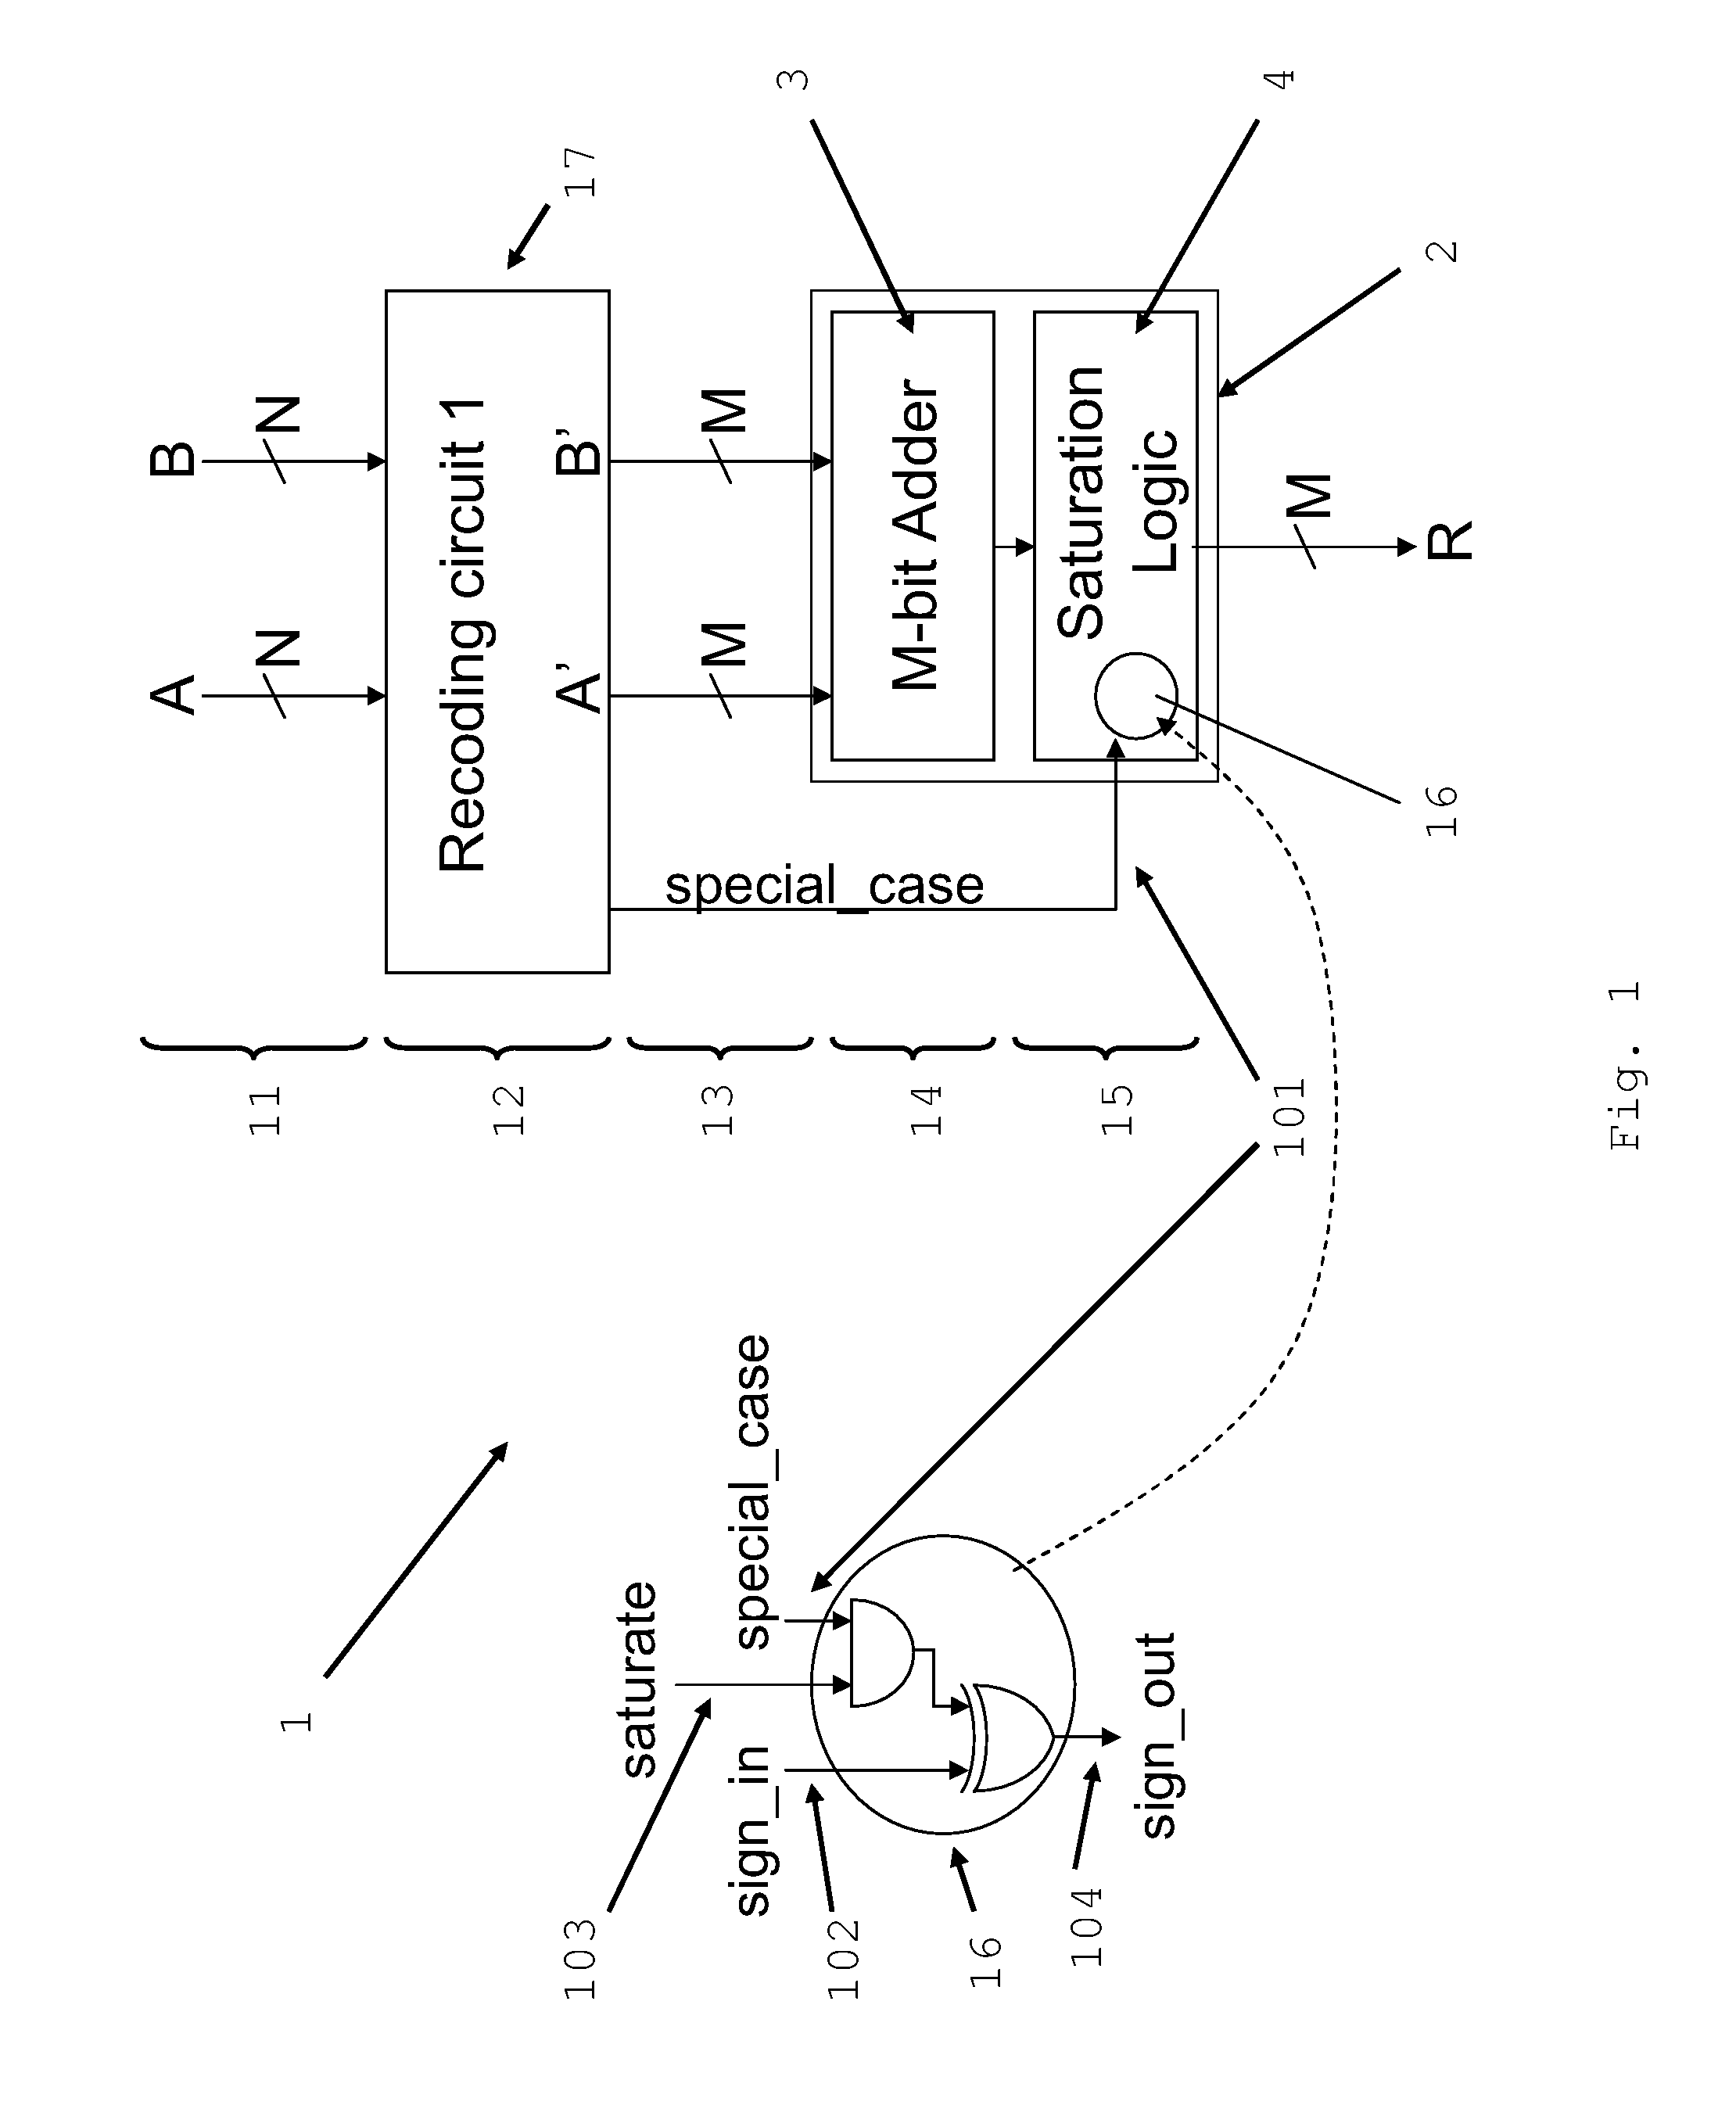 Electronic computing circuit for operand width reduction for a modulo adder followed by saturation concurrent message processing